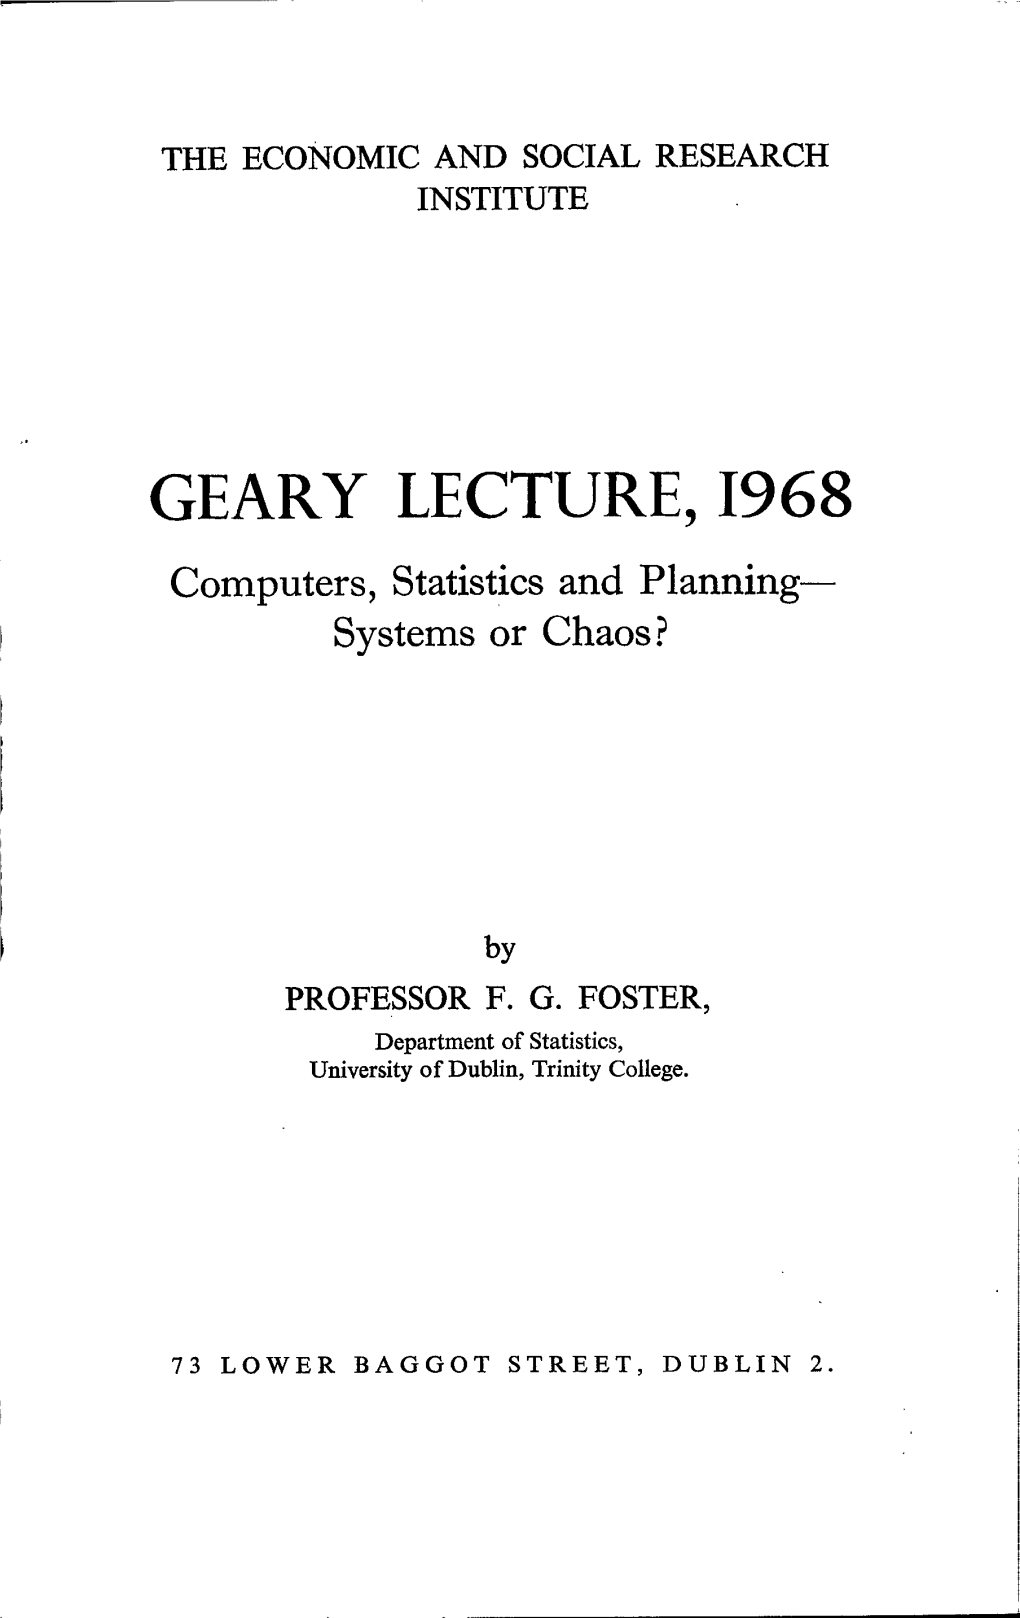 GEARY LECTURE, I968 Computers, Statistics and Planning~ Systems Or Chaos?